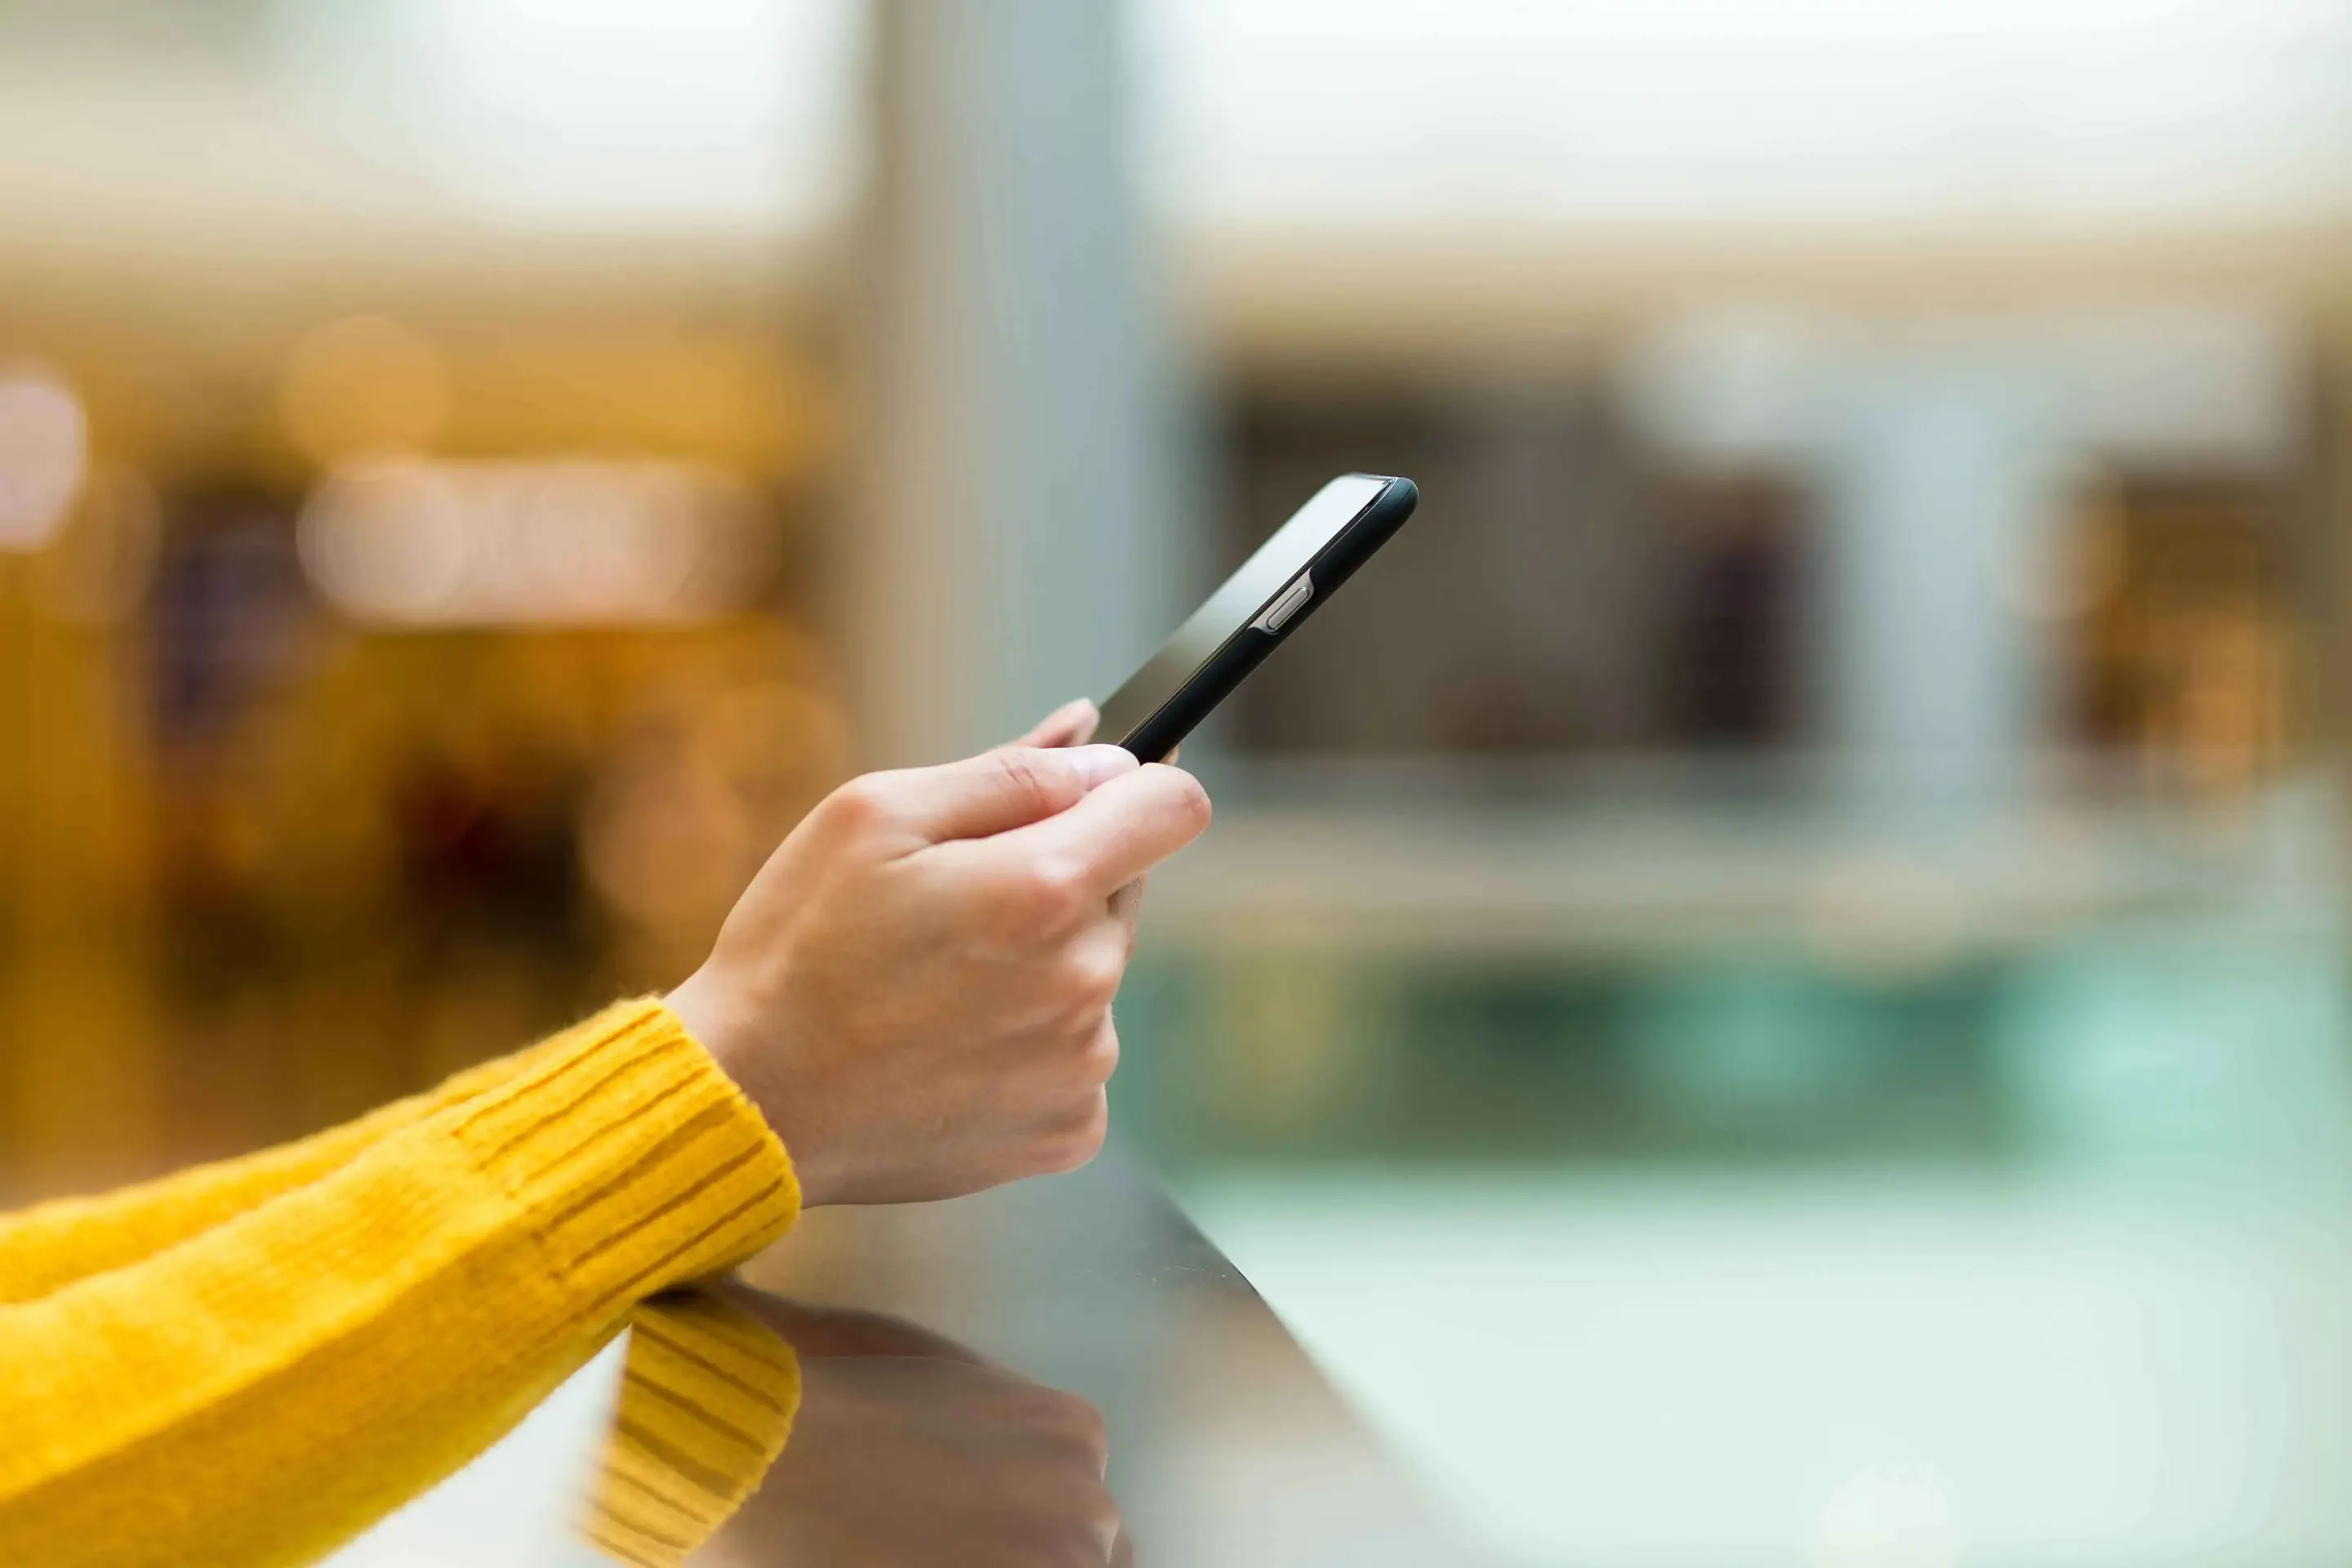 A side view of the forearms and hands of a person in a yellow sweater holding a smartphone while leaning against a silver railing. 